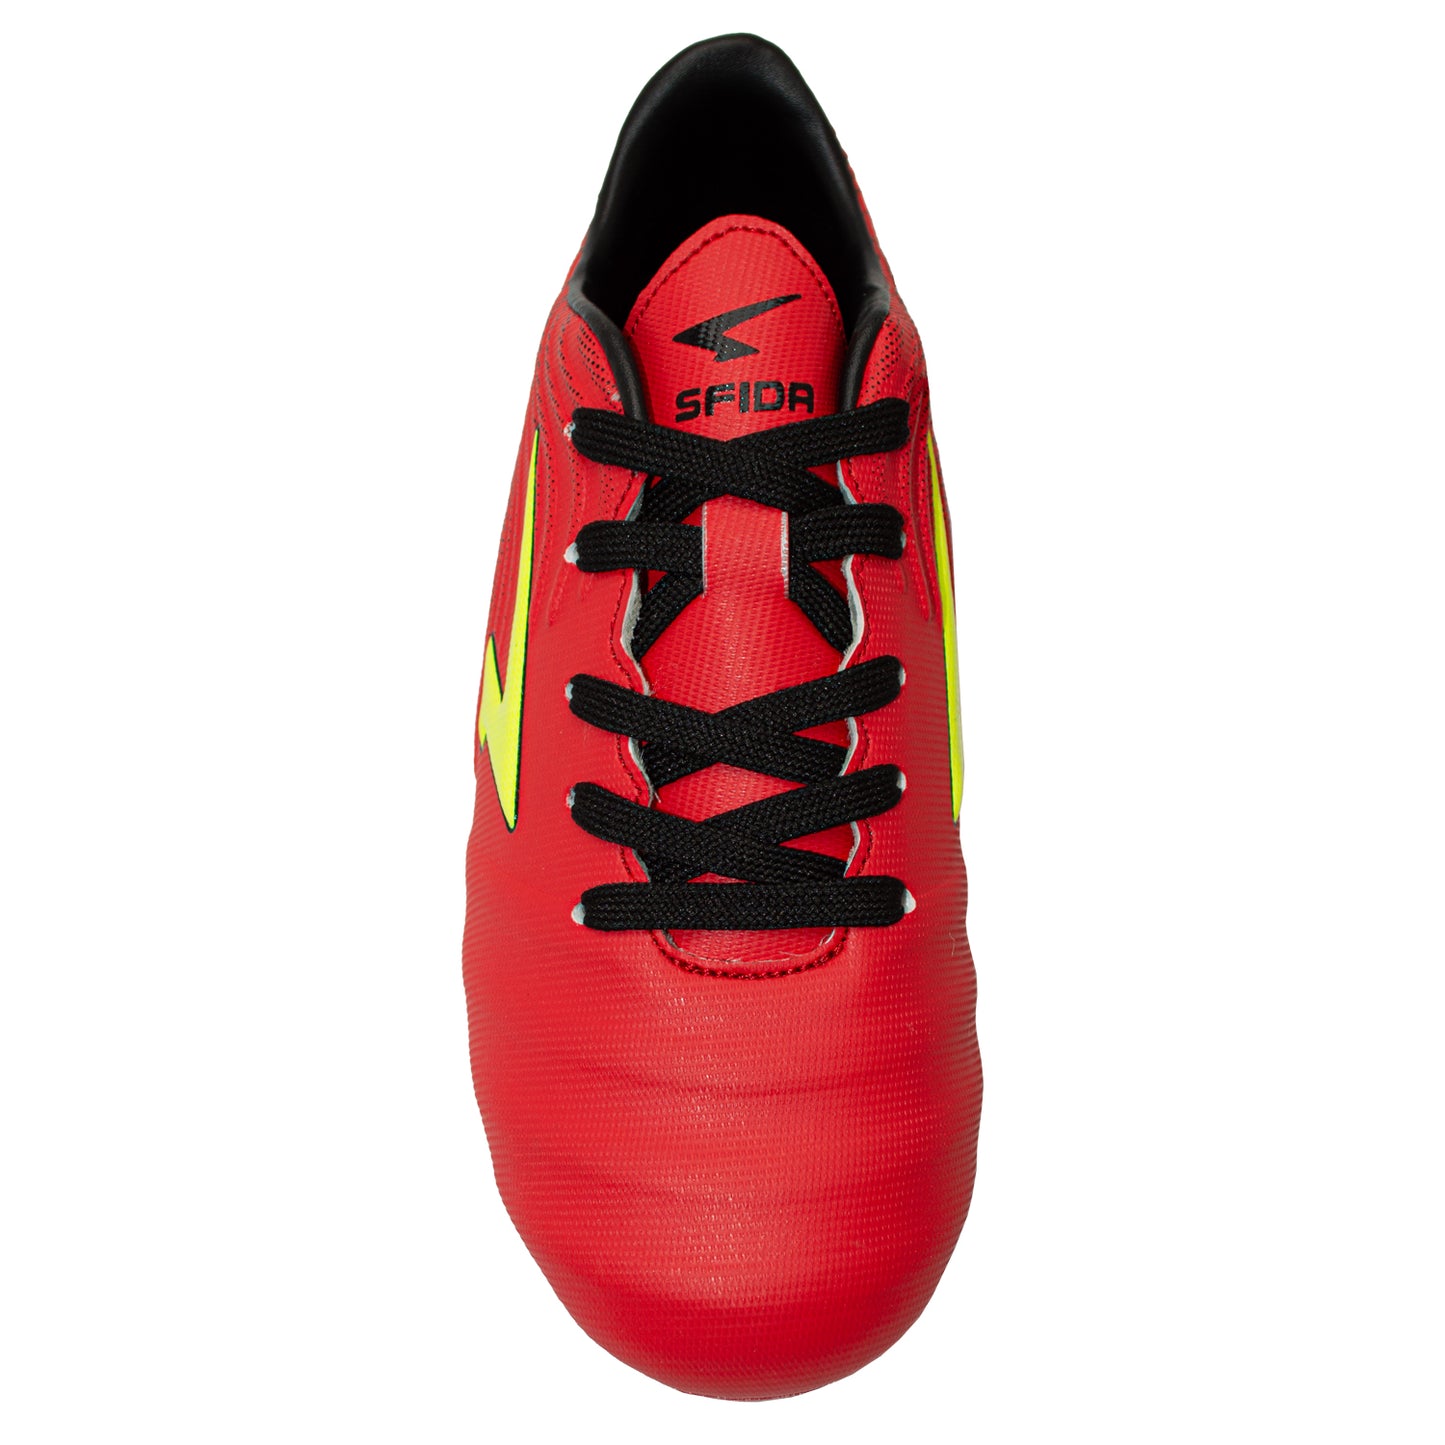 Swell Senior Football Boots - Red/Black/Yellow